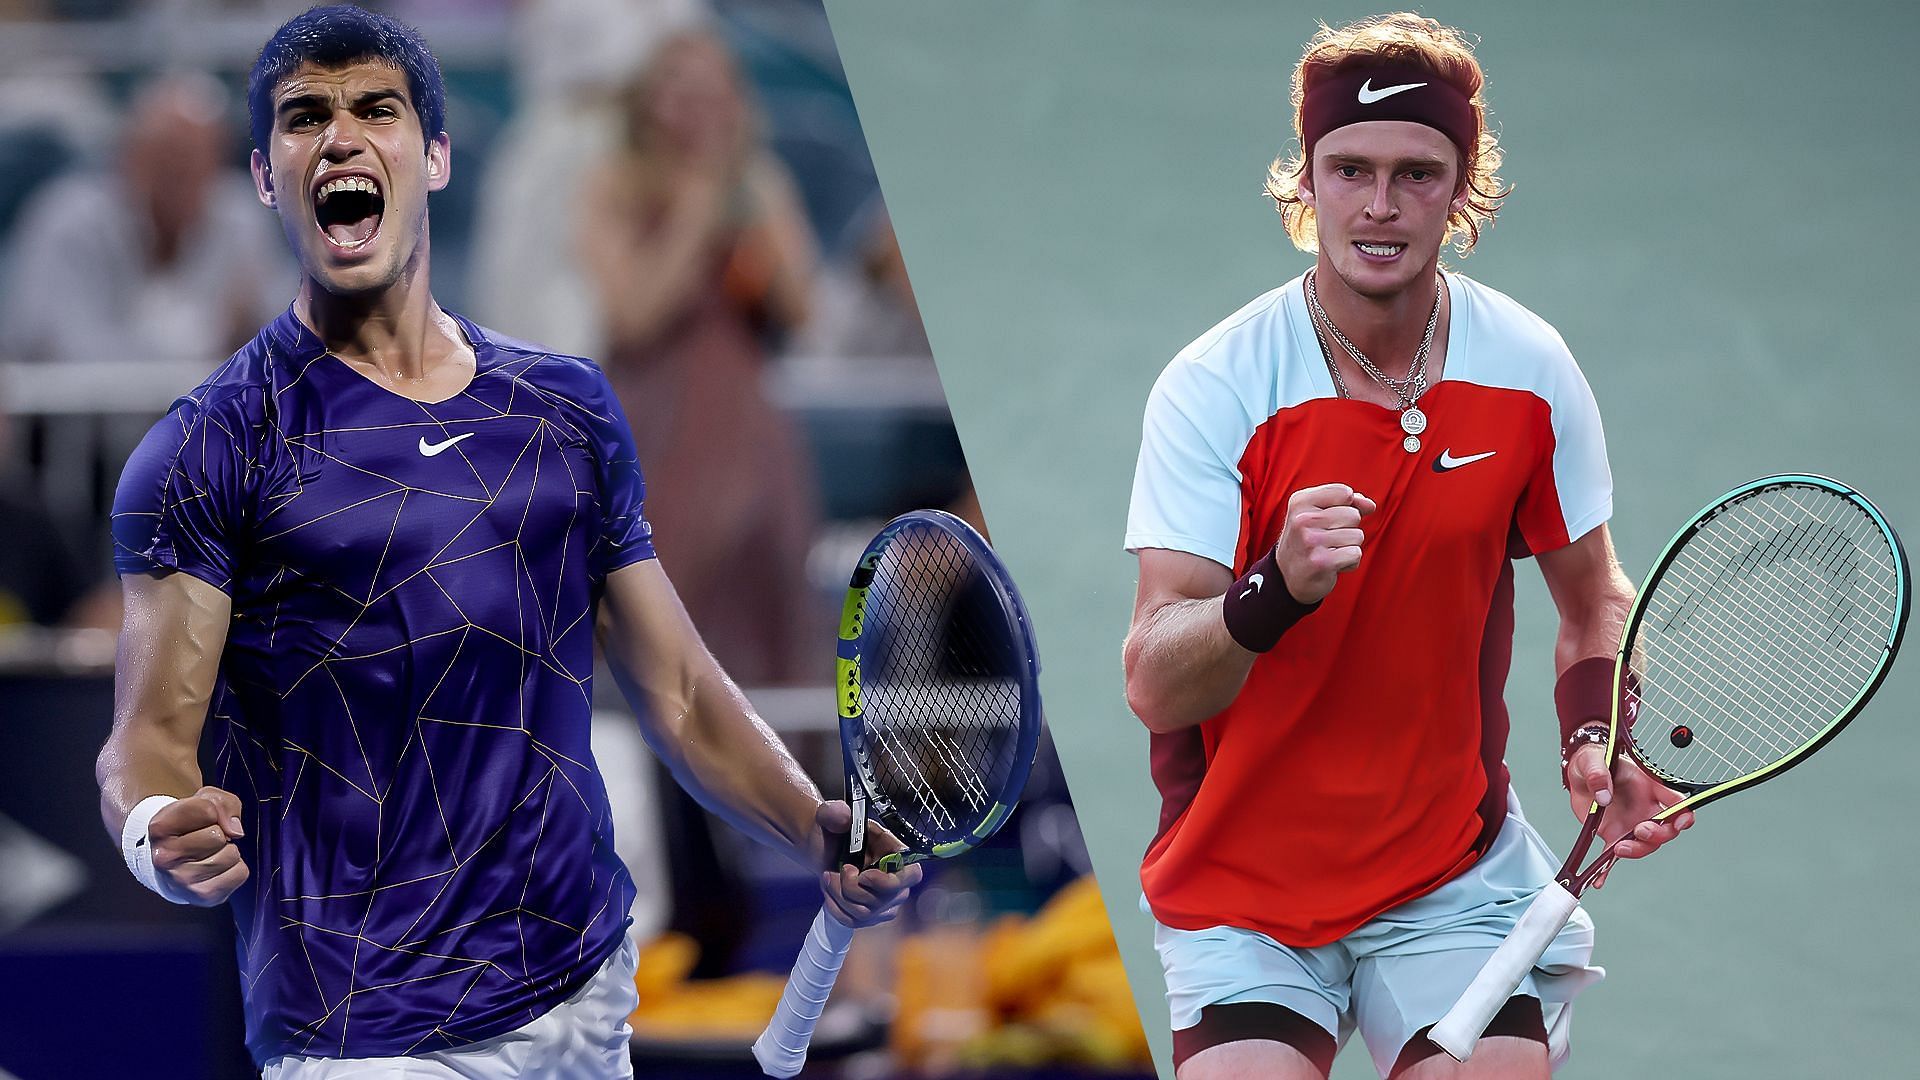 Carlos Alcaraz vs Andrey Rublev Where to watch, TV schedule, Live streaming details, and more Mubadala World Tennis Championship 2022